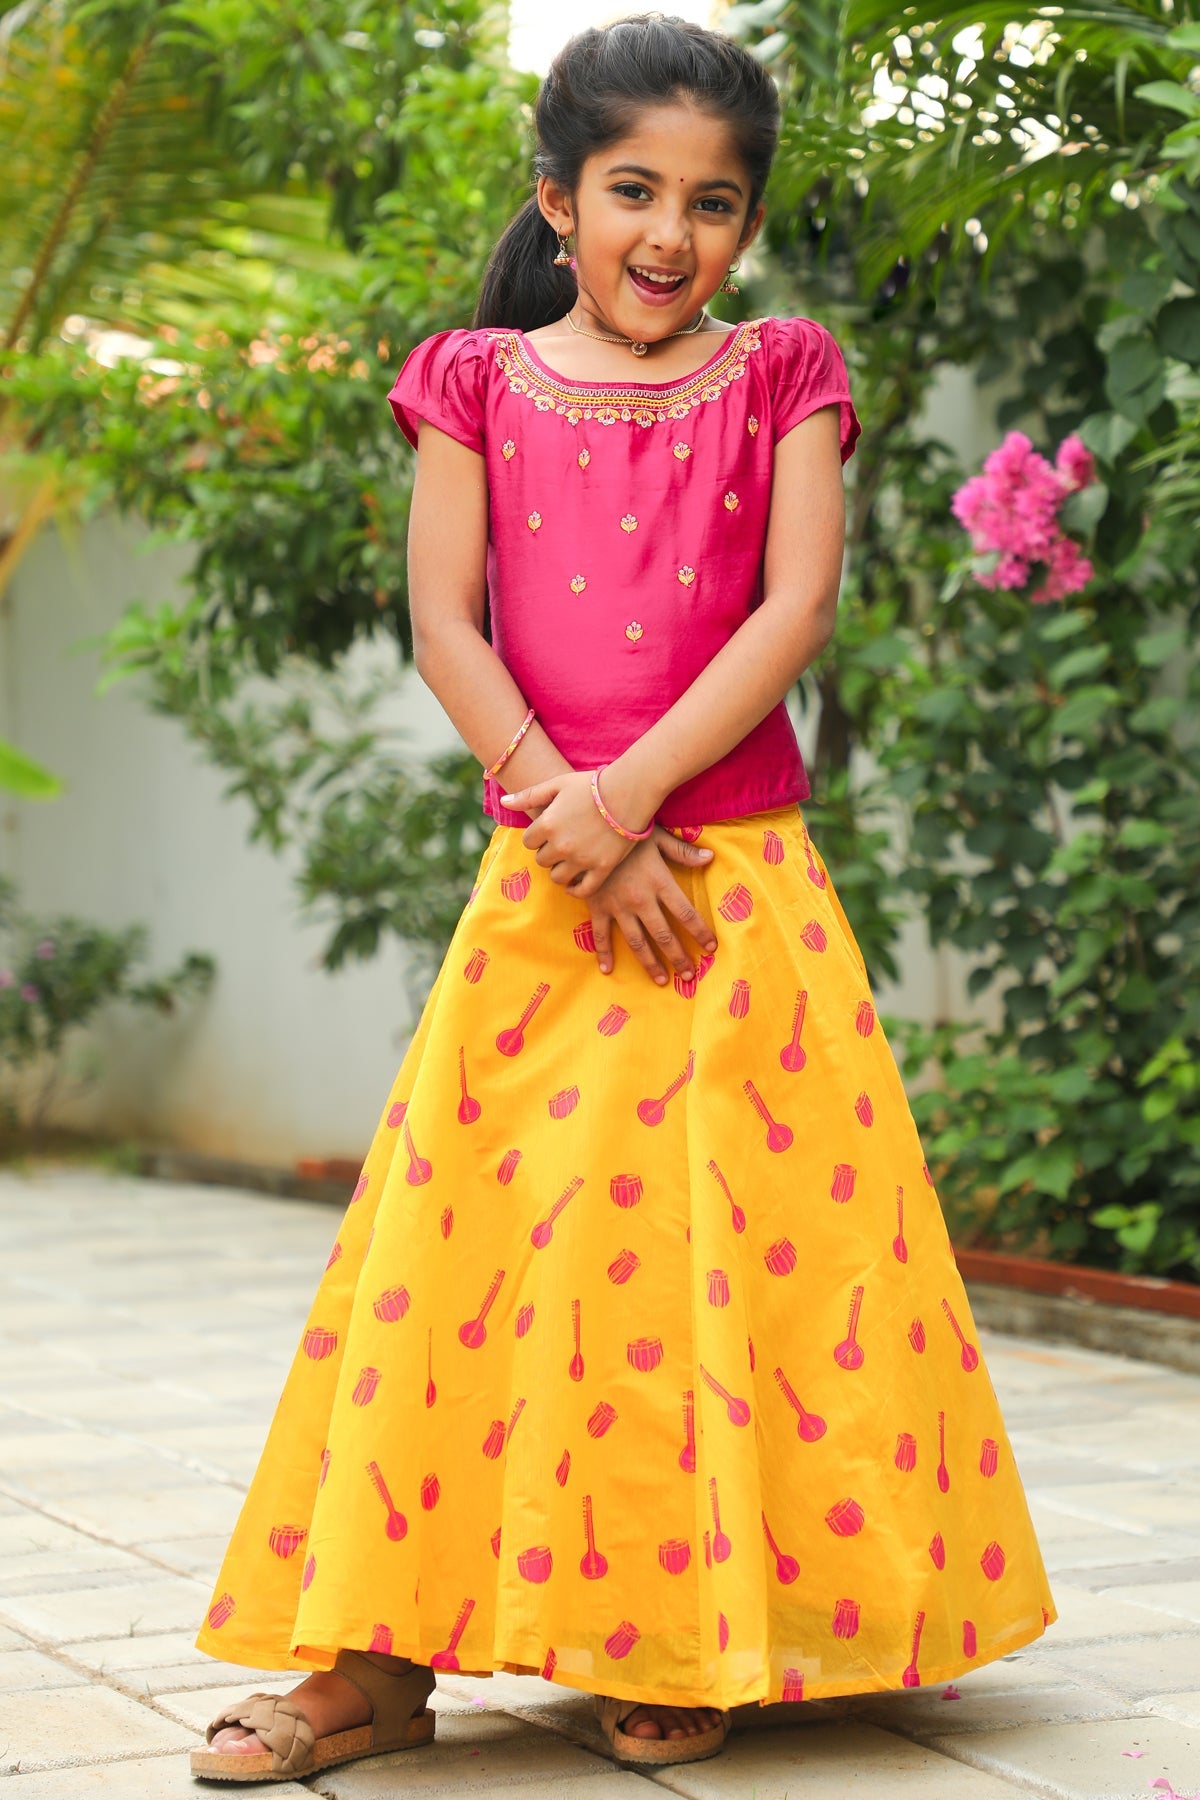 Floral Embroidered Top Raagha Motif Printed Skirt Set Pink Yellow